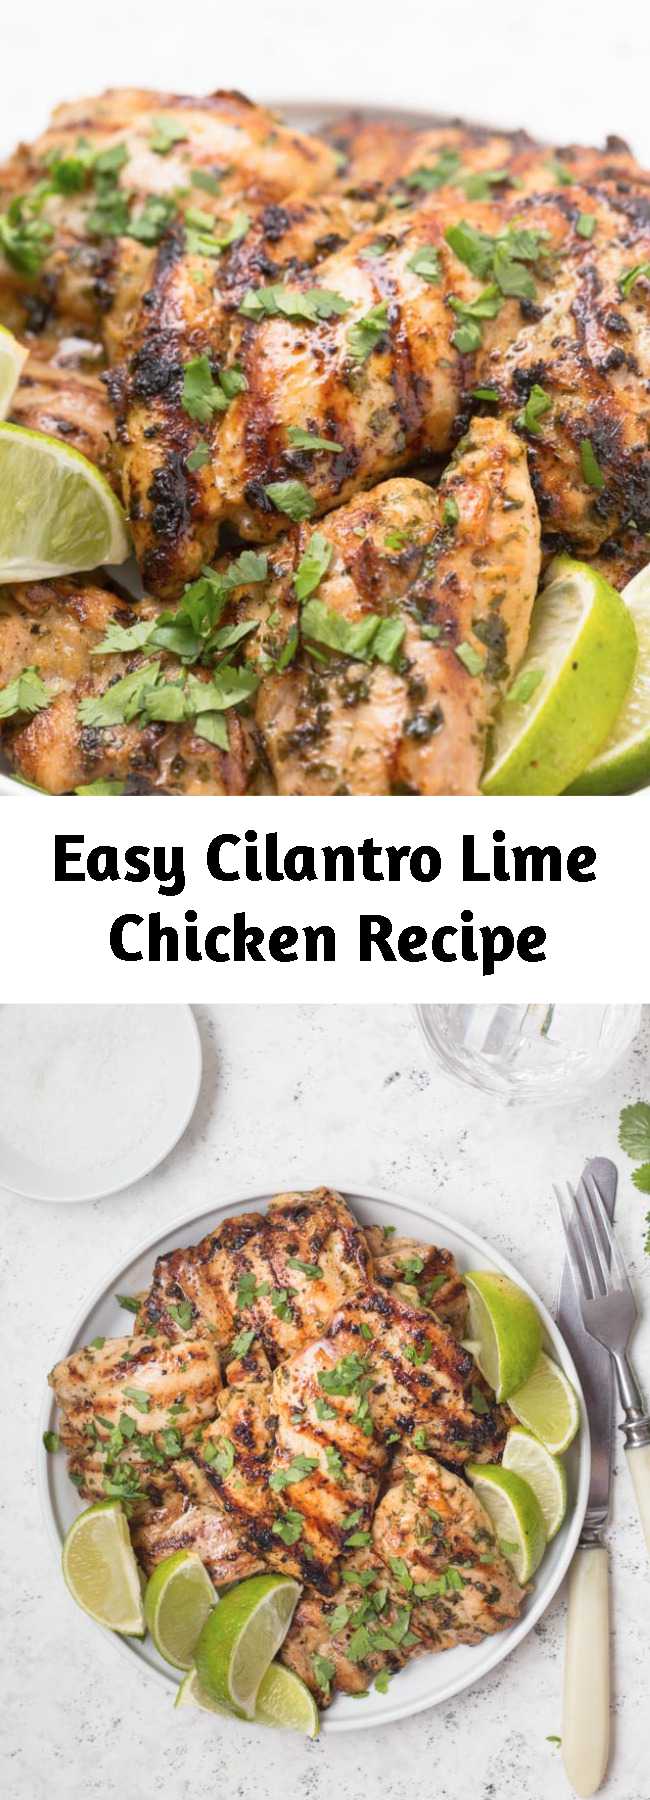 Easy Cilantro Lime Chicken Recipe - Easy Cilantro Lime Chicken, classic marinade, short marinate time, you can cook it baked in the oven, in a cast iron skillet, on the grill, put it in a salad or in tacos! Make it with chicken thighs or chicken breast. Easy healthy chicken dinner recipe, perfect for meal prep and makes a great freezer meal, it's keto, low carb, paleo, whole30, clean eating recipe, gluten free and very quick and easy to make.